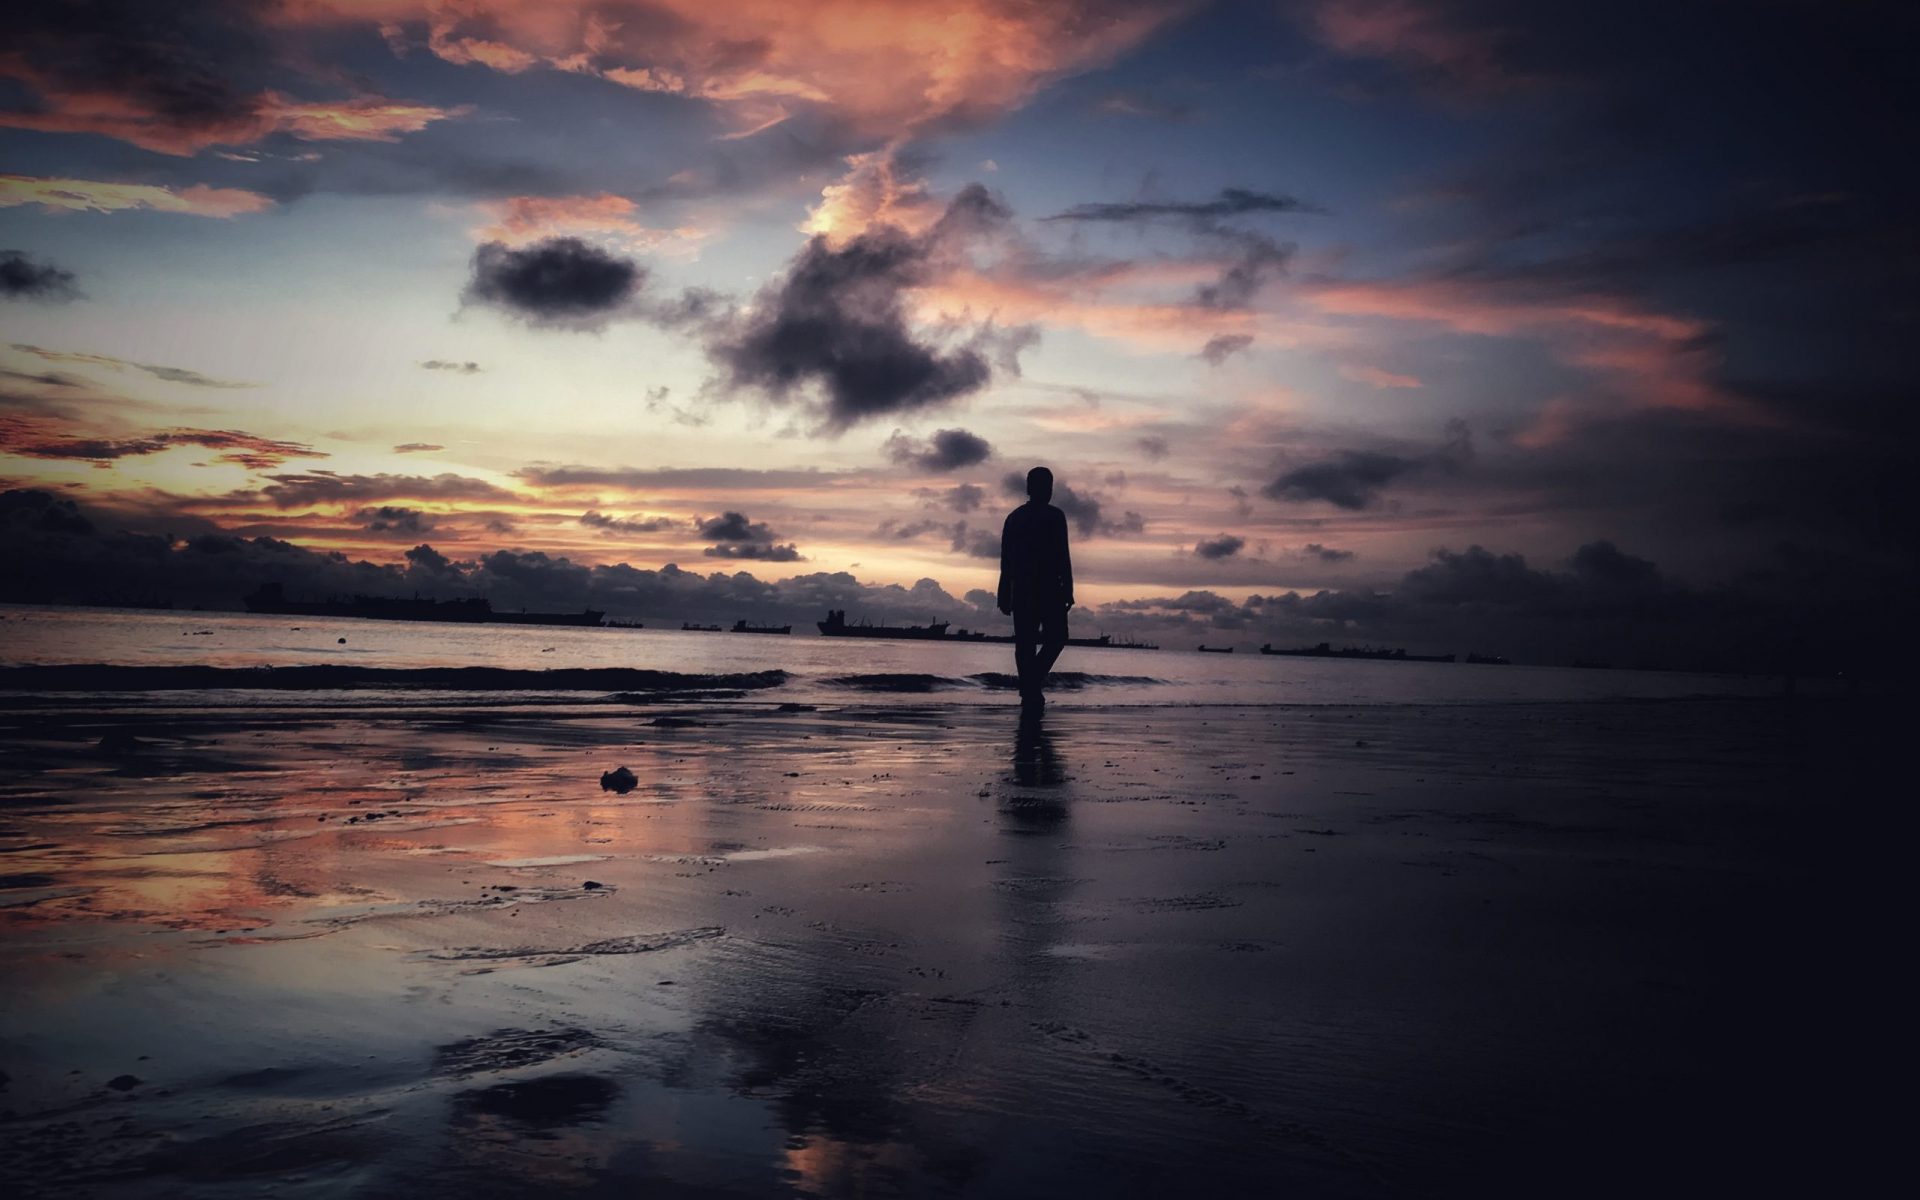 silhouette of person standing on seashore during sunset